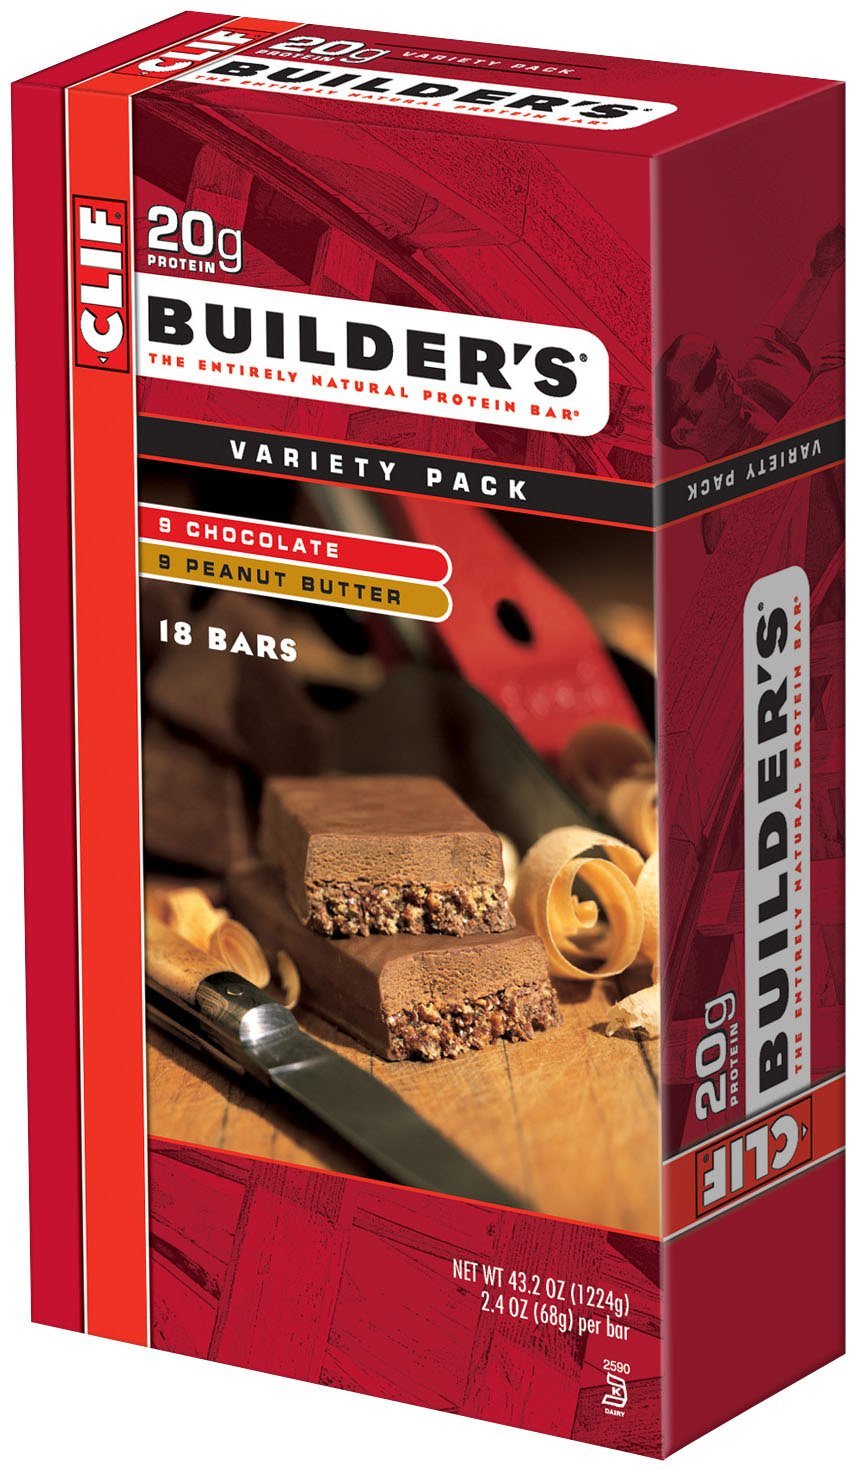 Clif Bar Builder's Bar, Variety Pack, 9 Chocolate and 9 Chocolate Peanut Butter, 2.4-Ounce Bars, 18 Count  $19.51